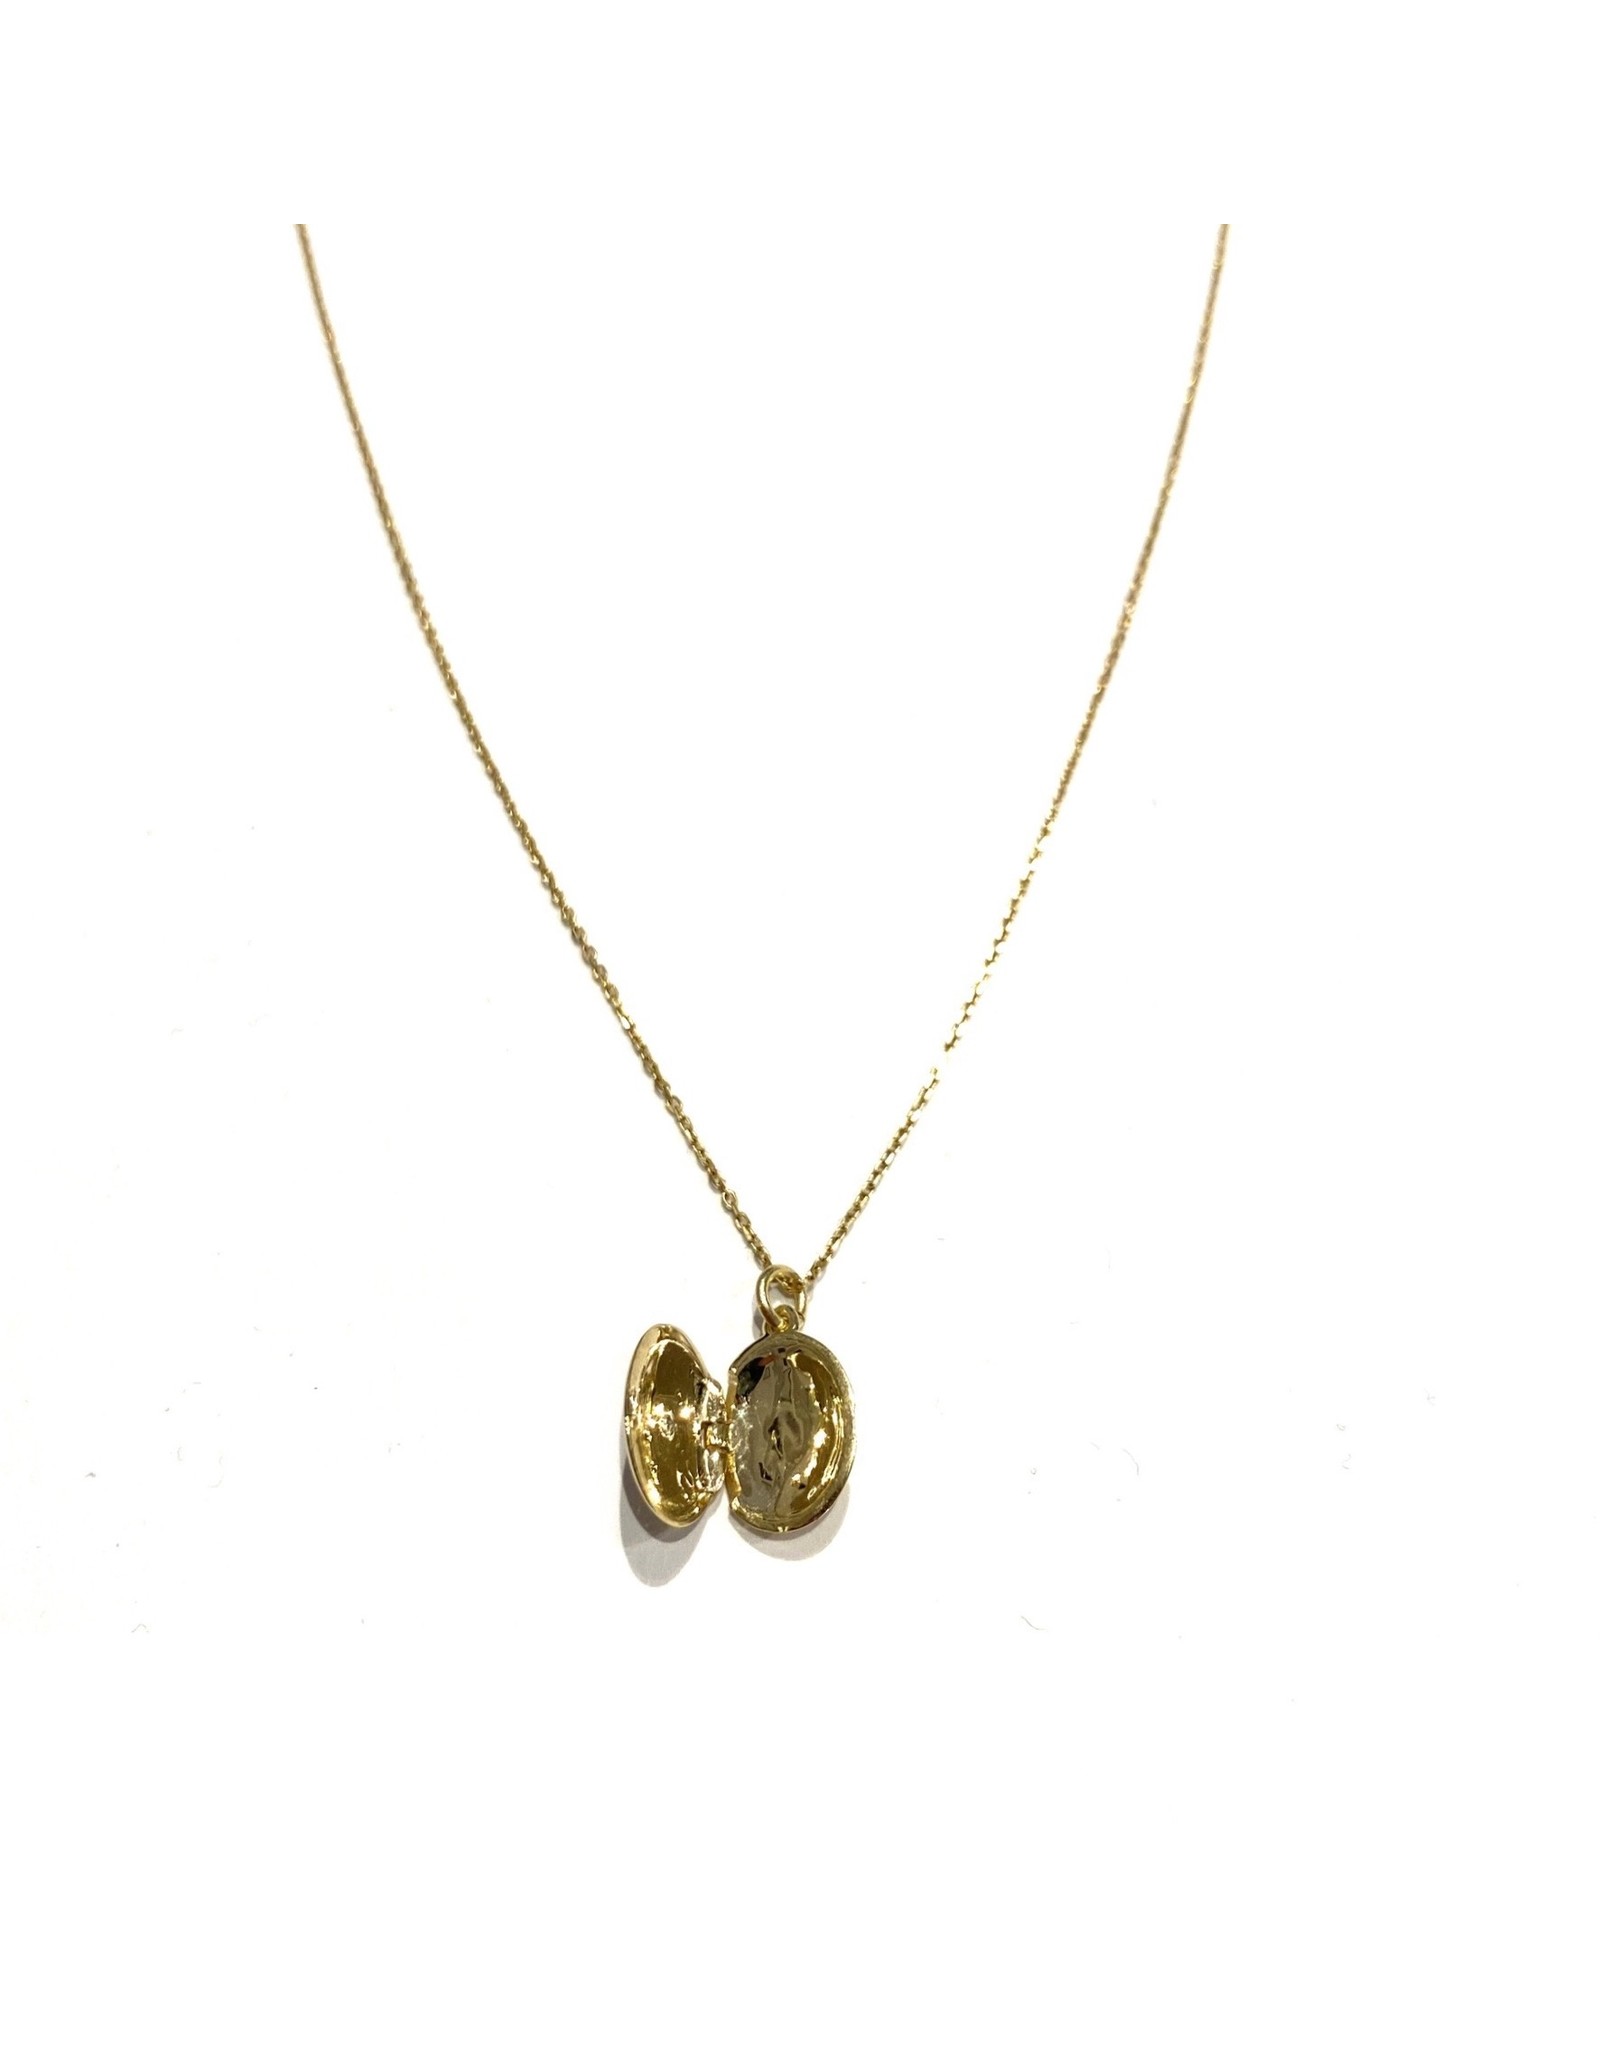 Bo Gold Necklace - Gold